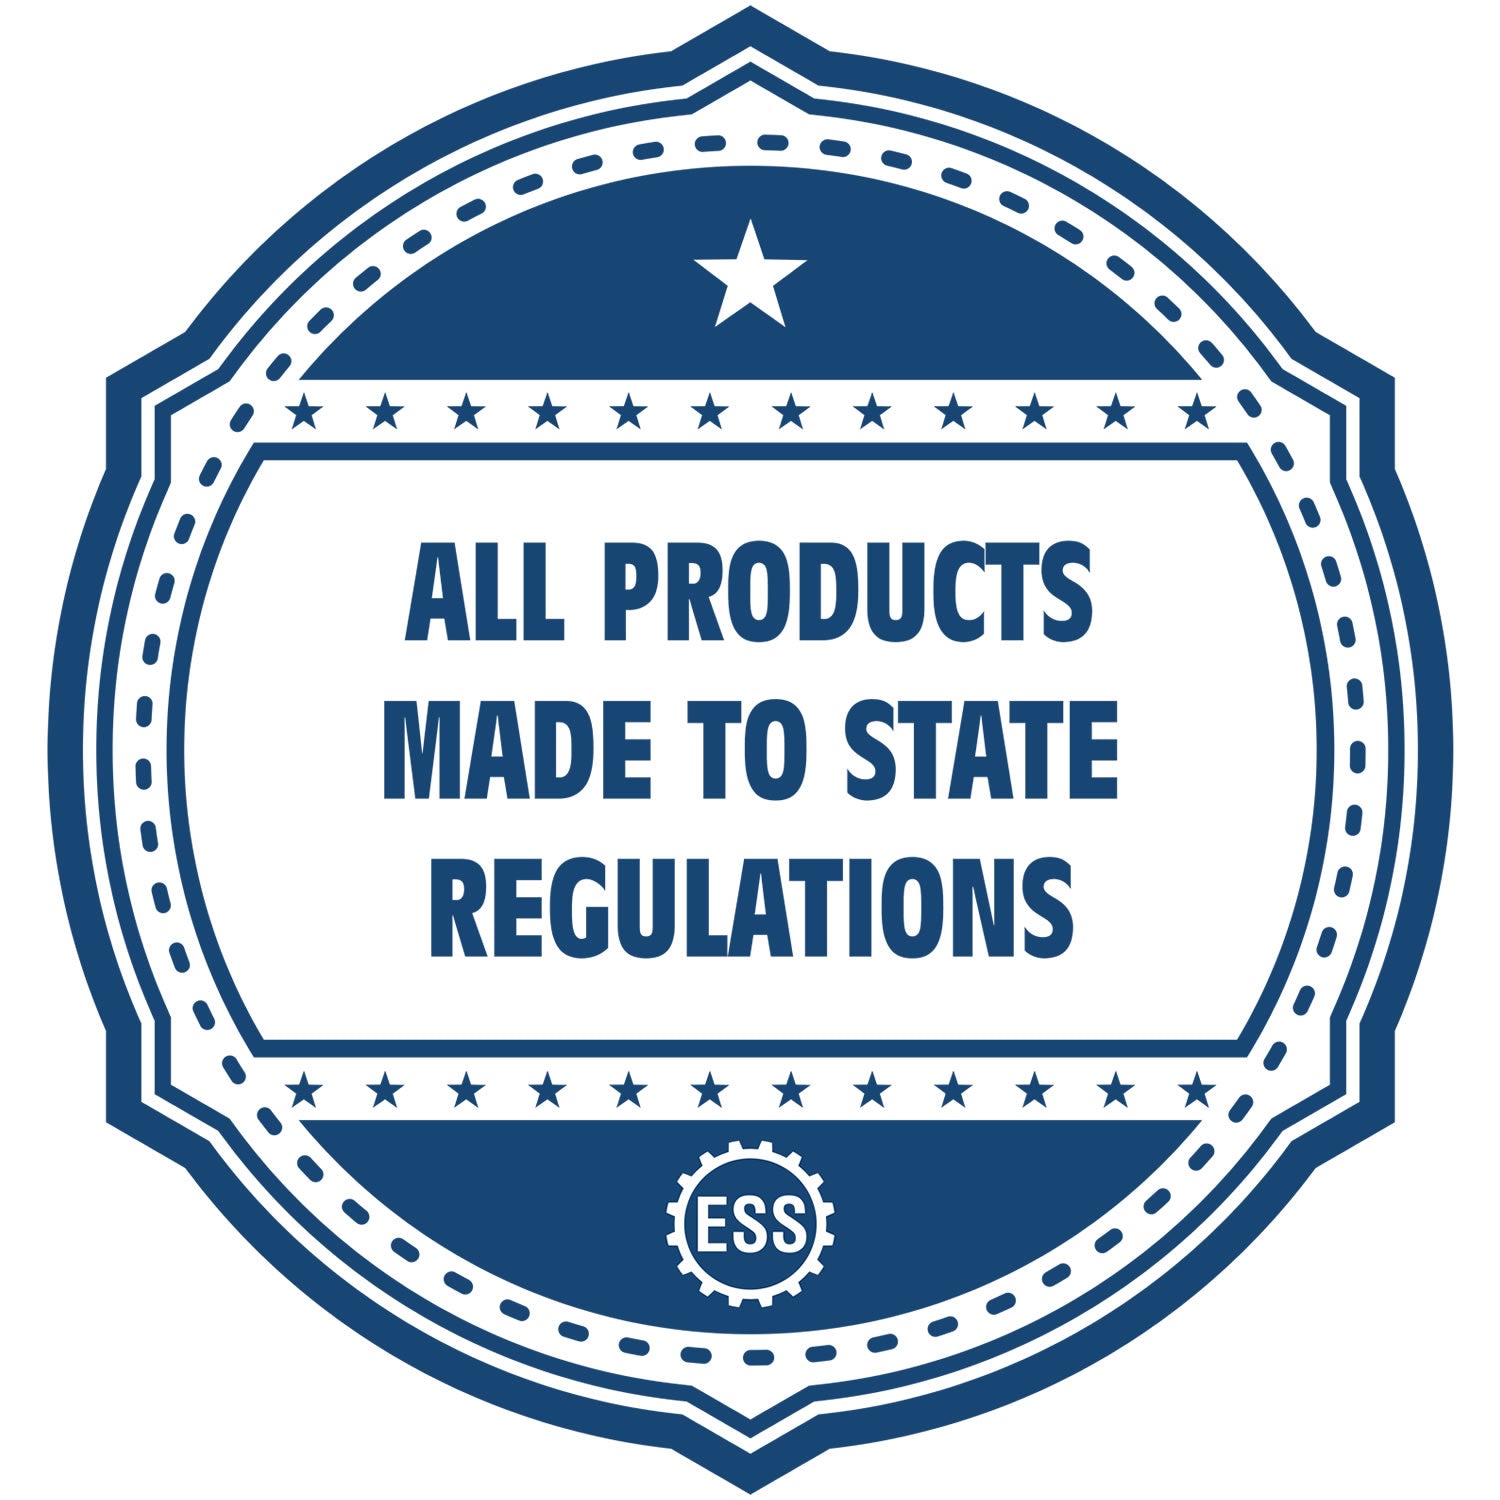 An icon or badge element for the Heavy Duty Cast Iron Tennessee Land Surveyor Seal Embosser showing that this product is made in compliance with state regulations.